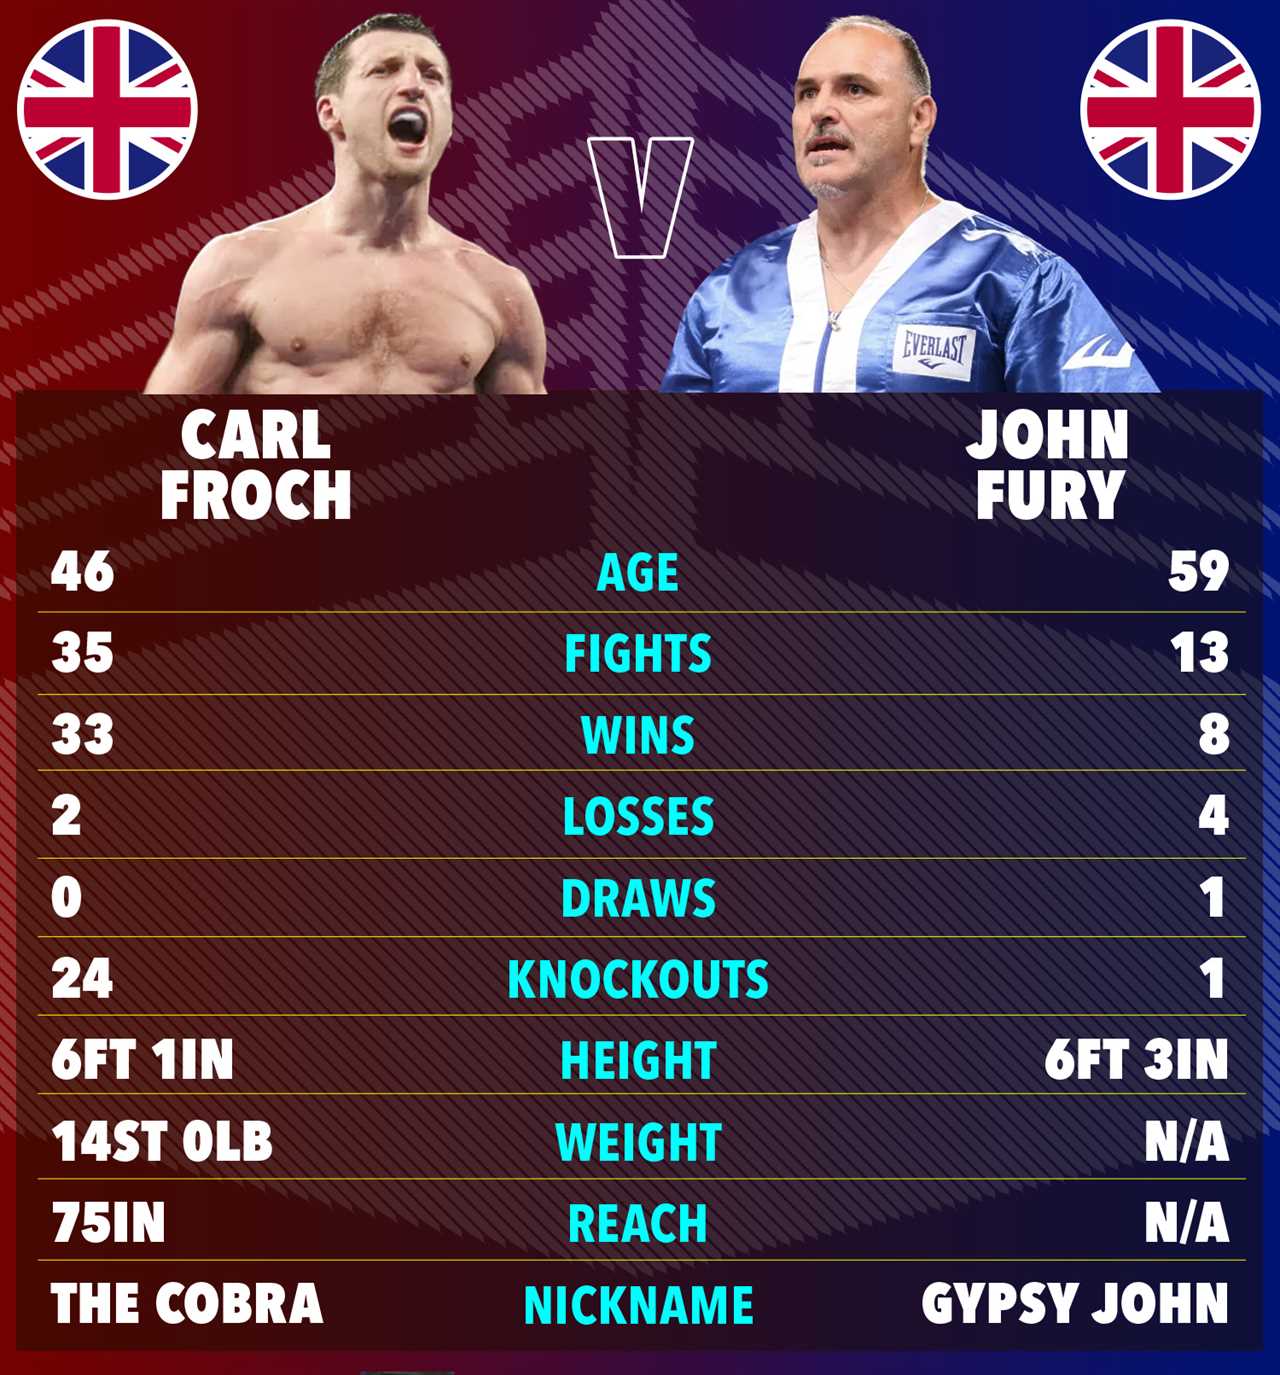 Carl Froch and John Fury's War of Words - Could Wembley host a fight?